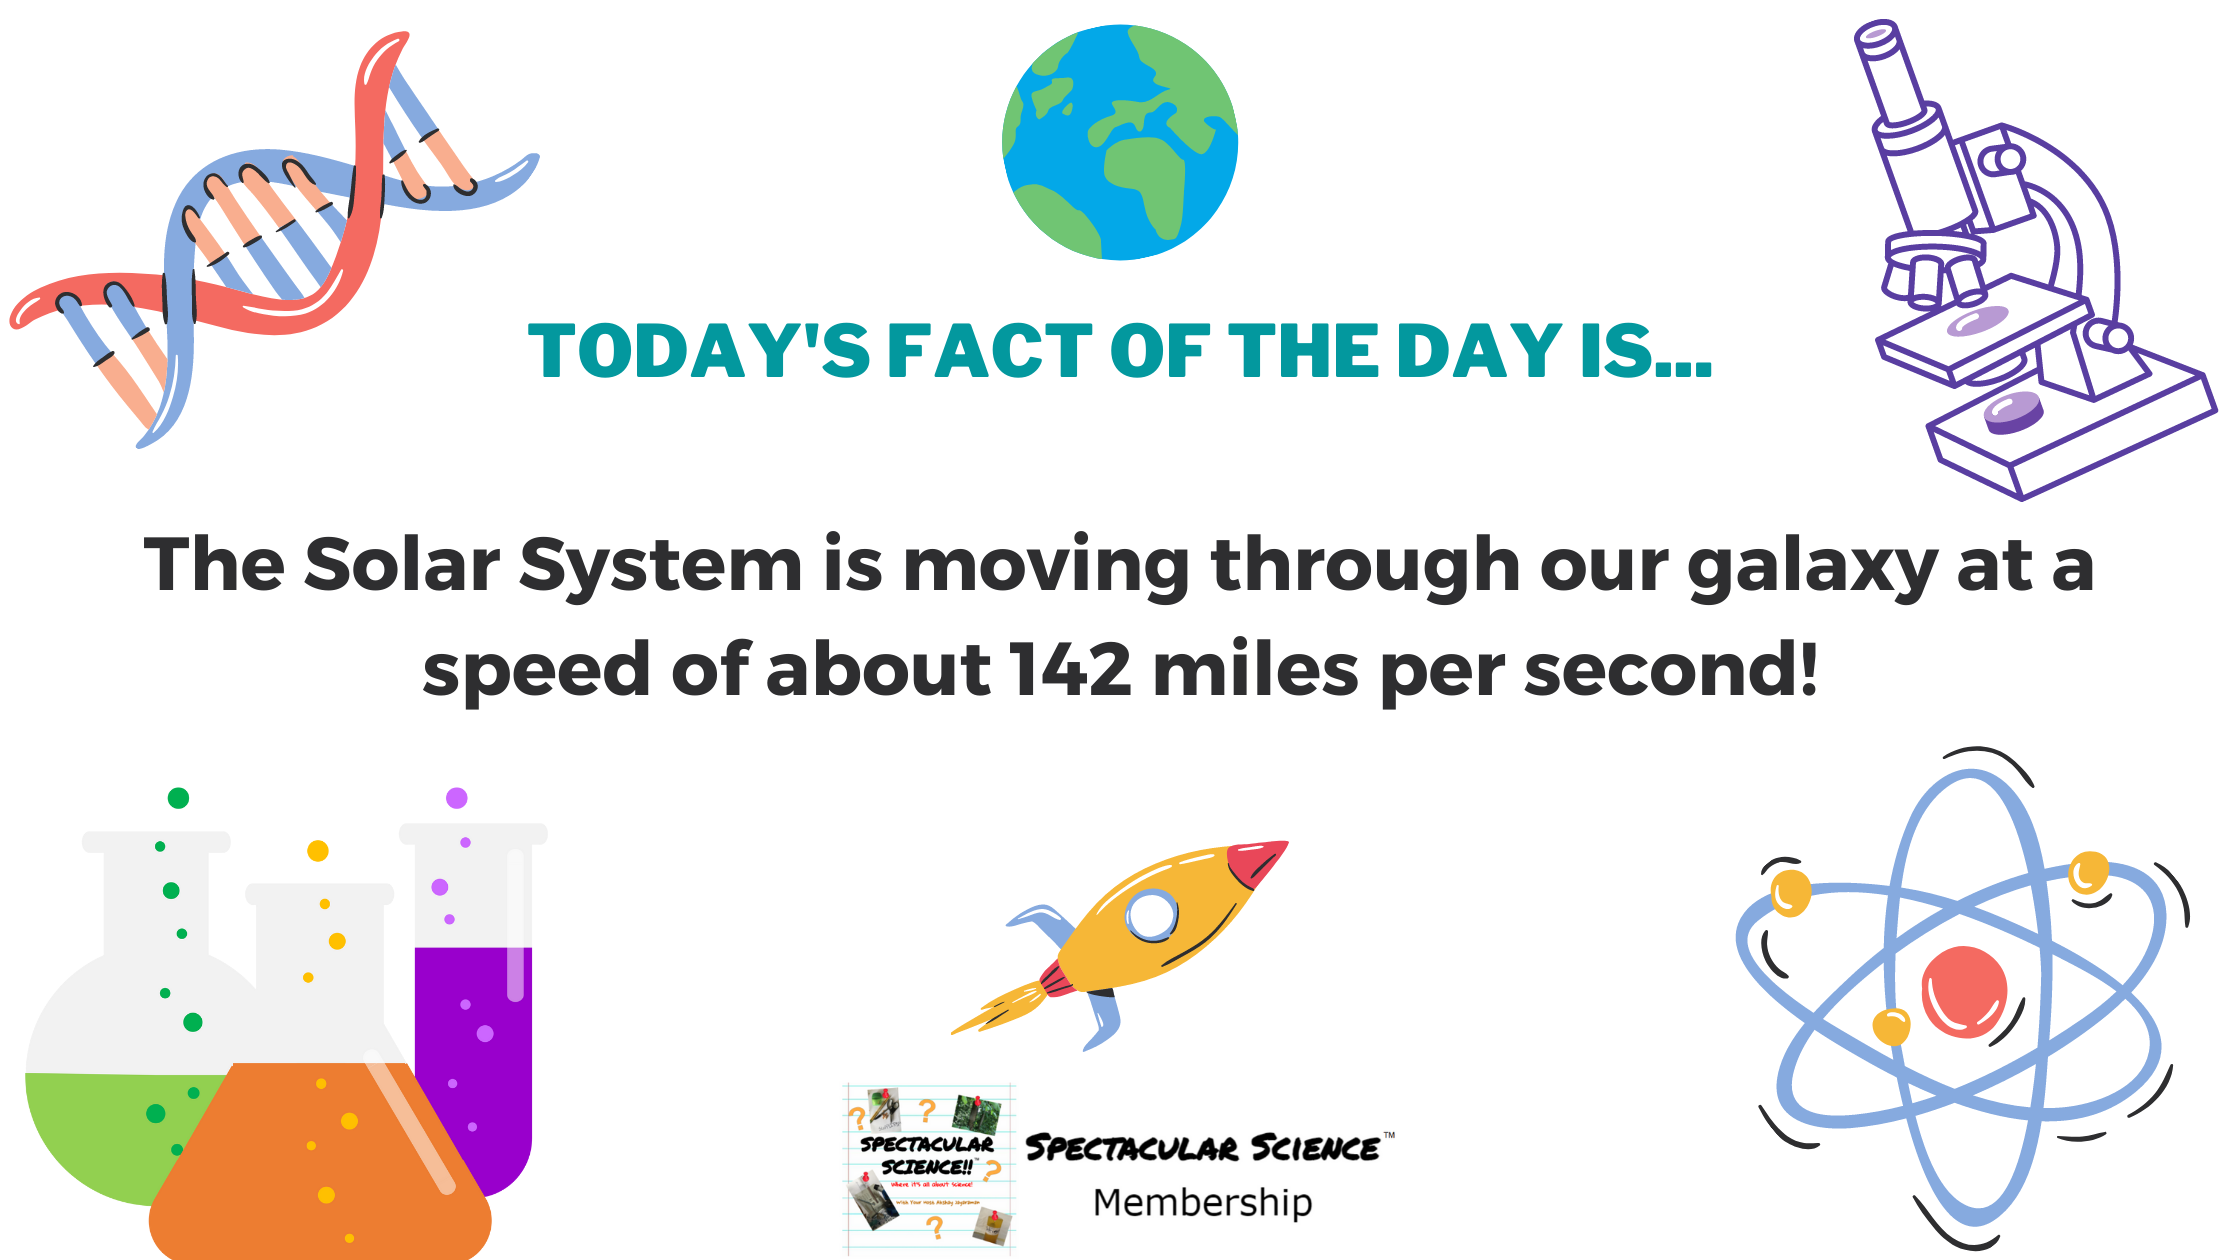 Fact of the Day Image Apr. 17th